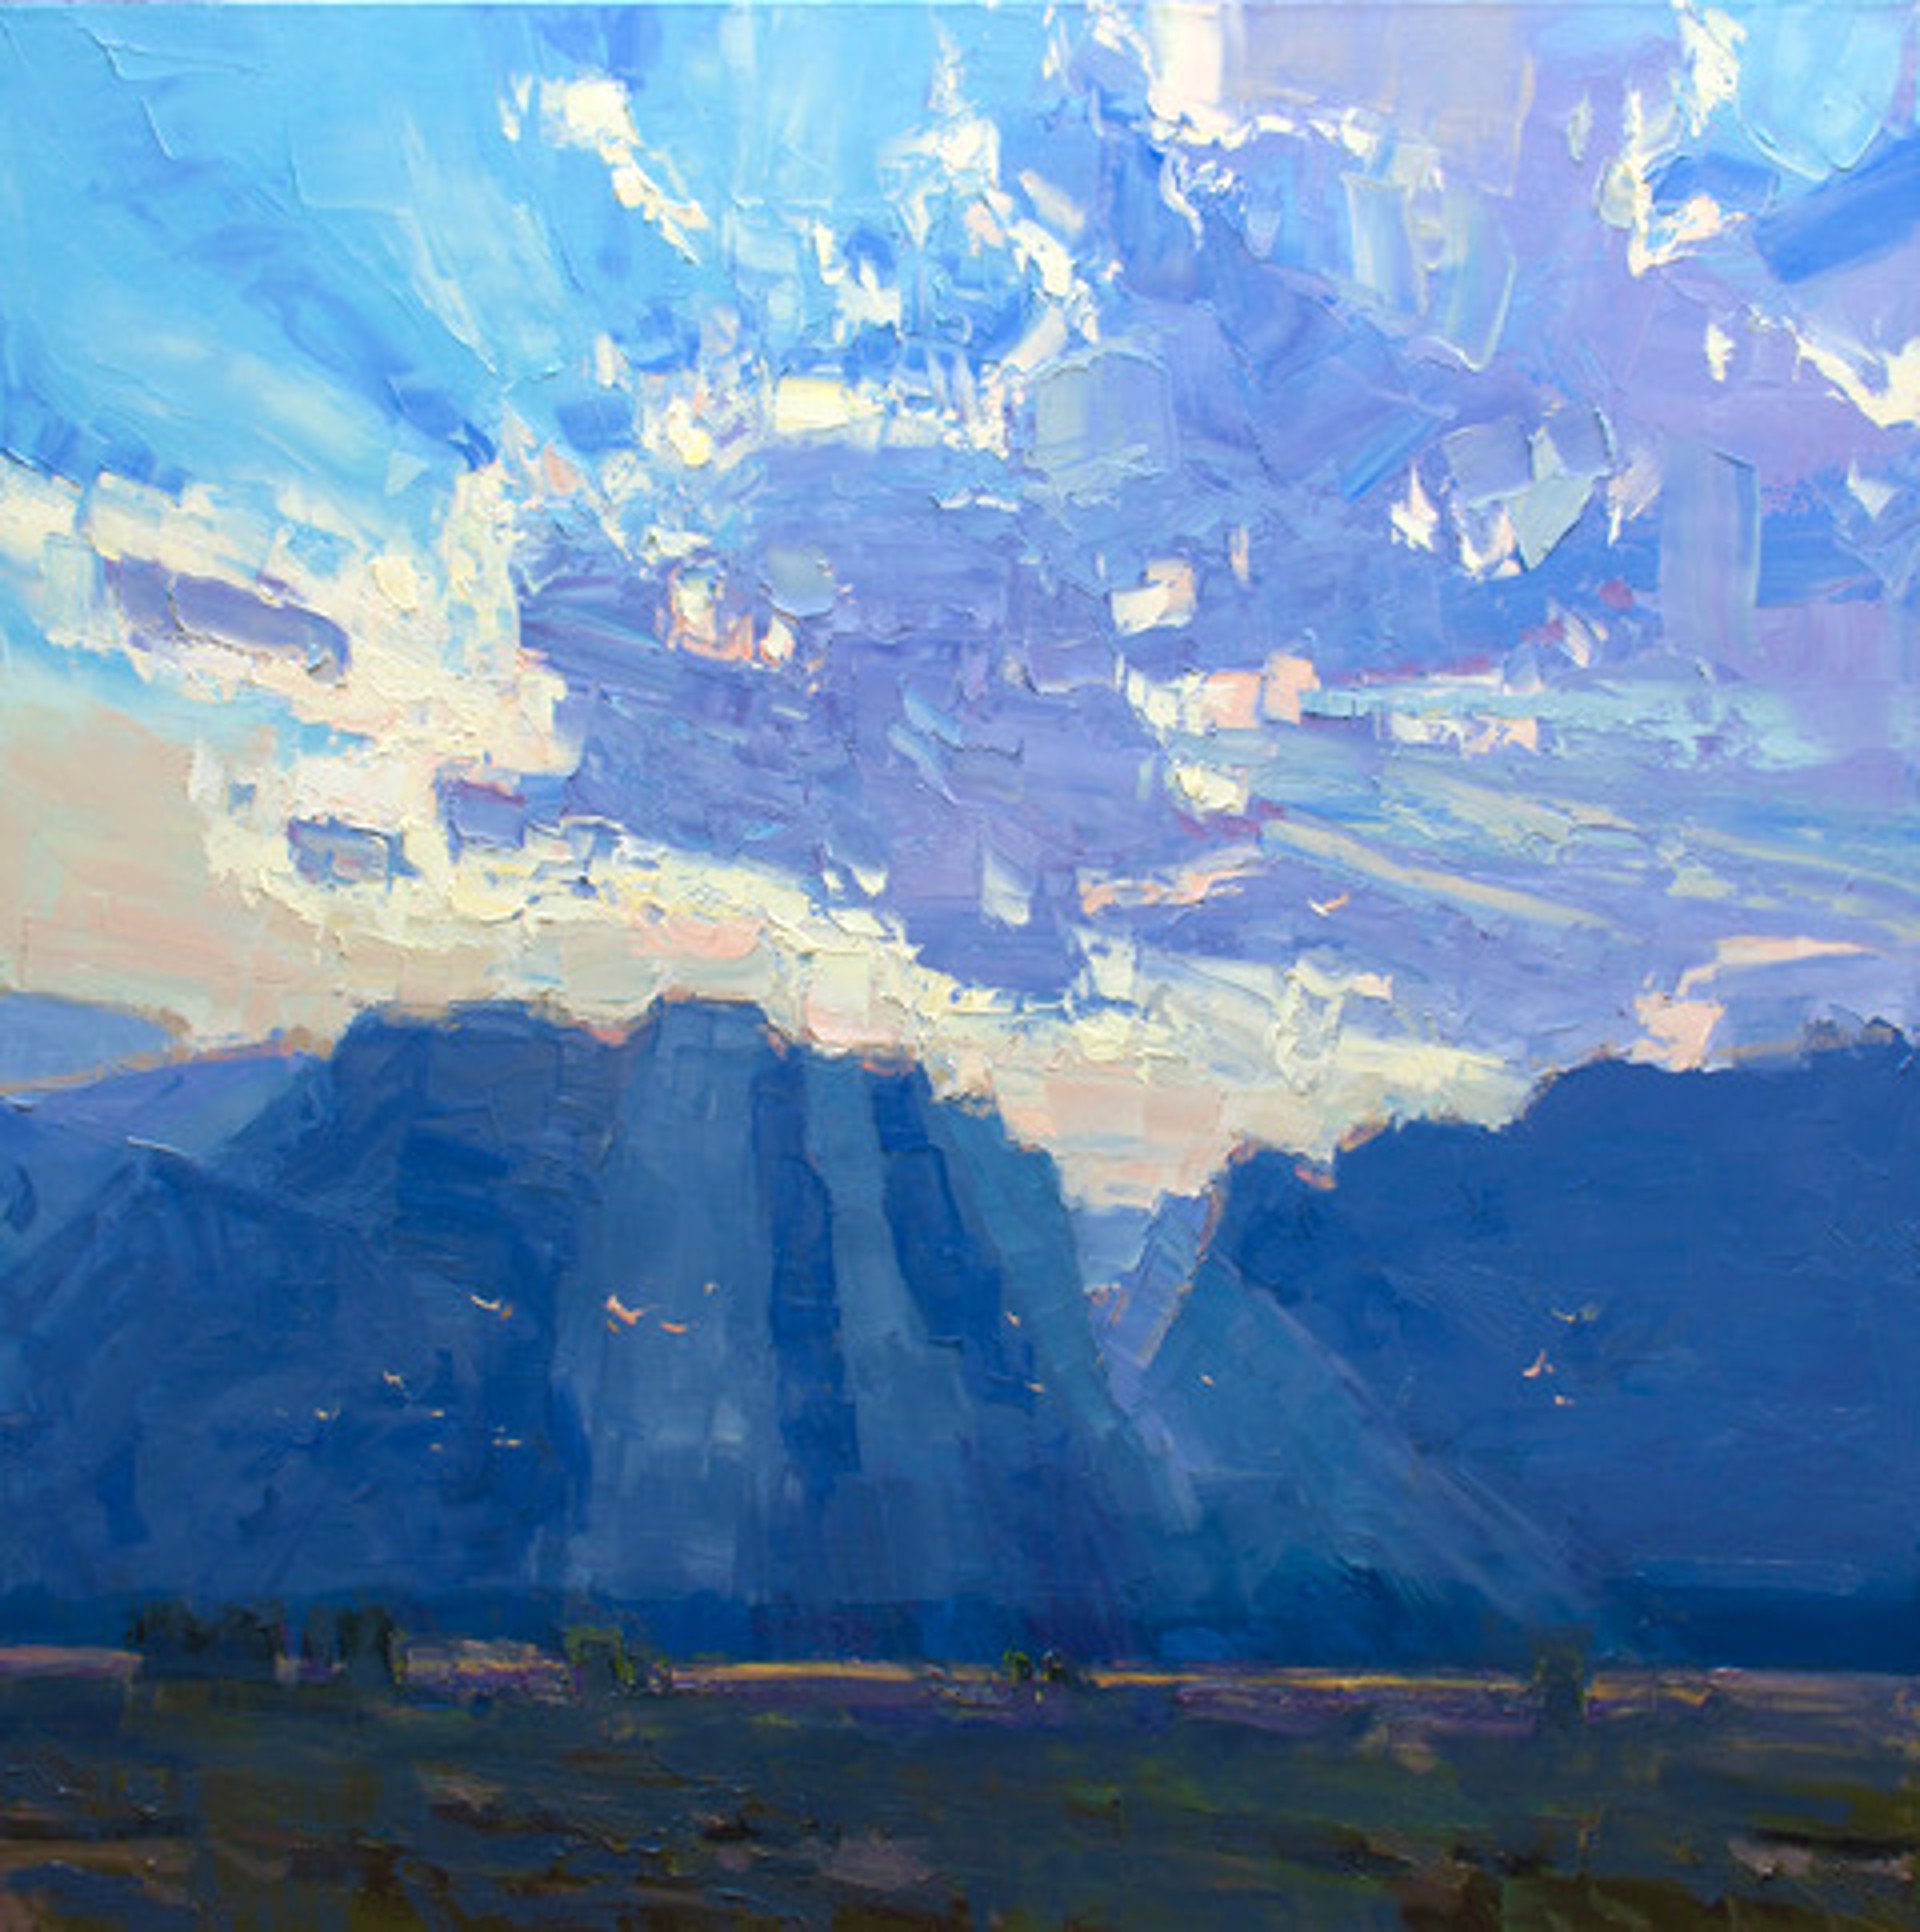  A Palette Knife Oil Painting Of The Sun Shining Through A Cloud Over A Mountain Range By Silas Thompson At Gallery Wild